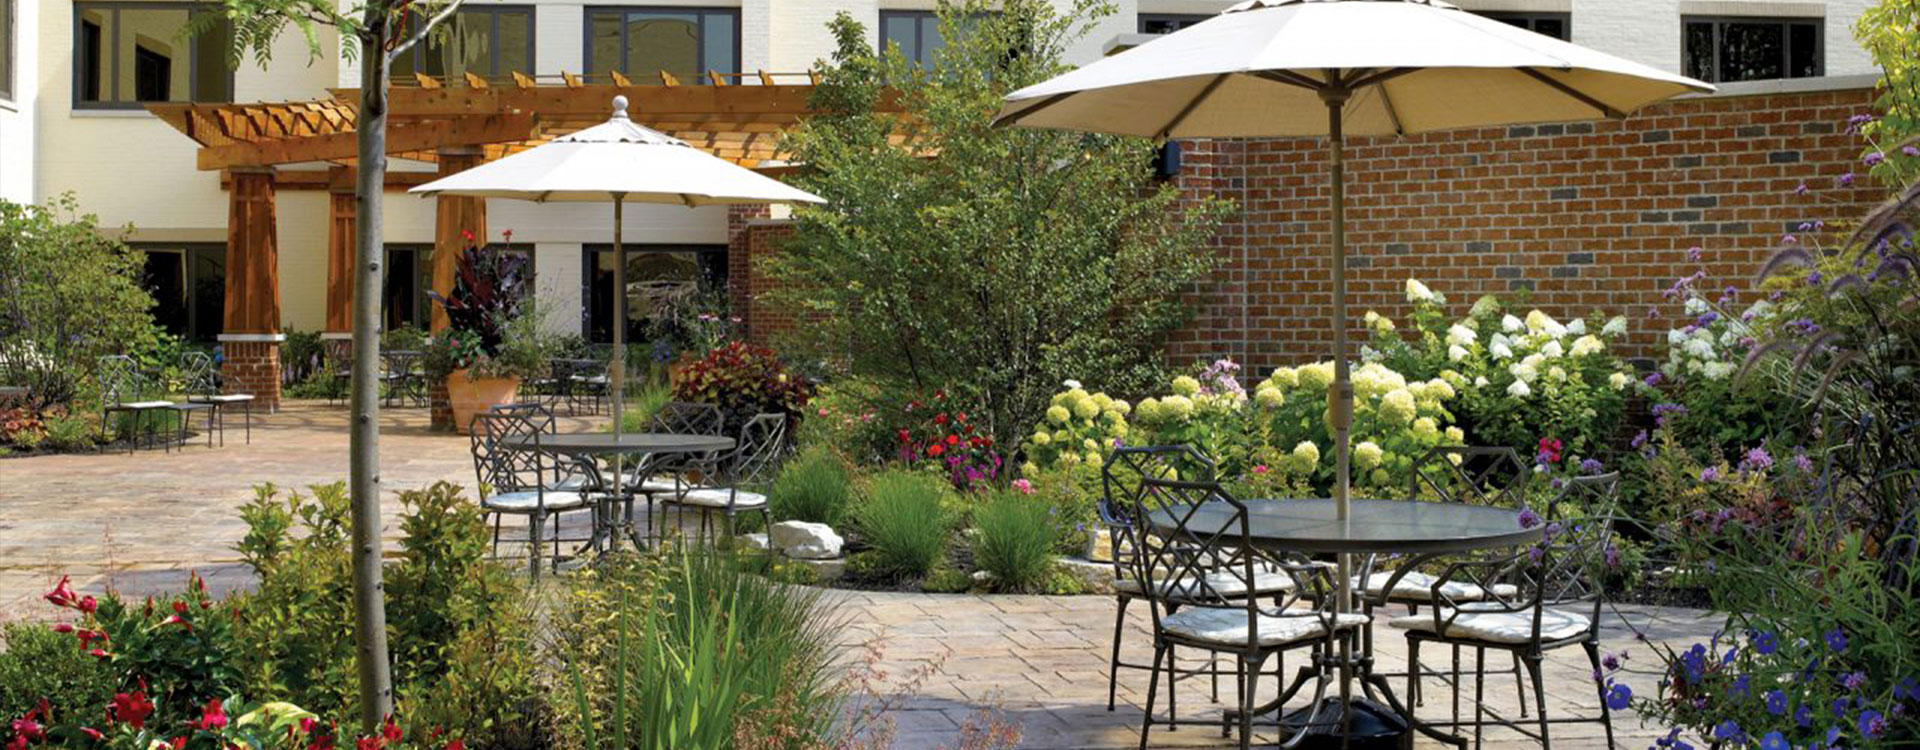 A taste of the Chicago Botanic Gardens at Whitehall of Deerfield's patio